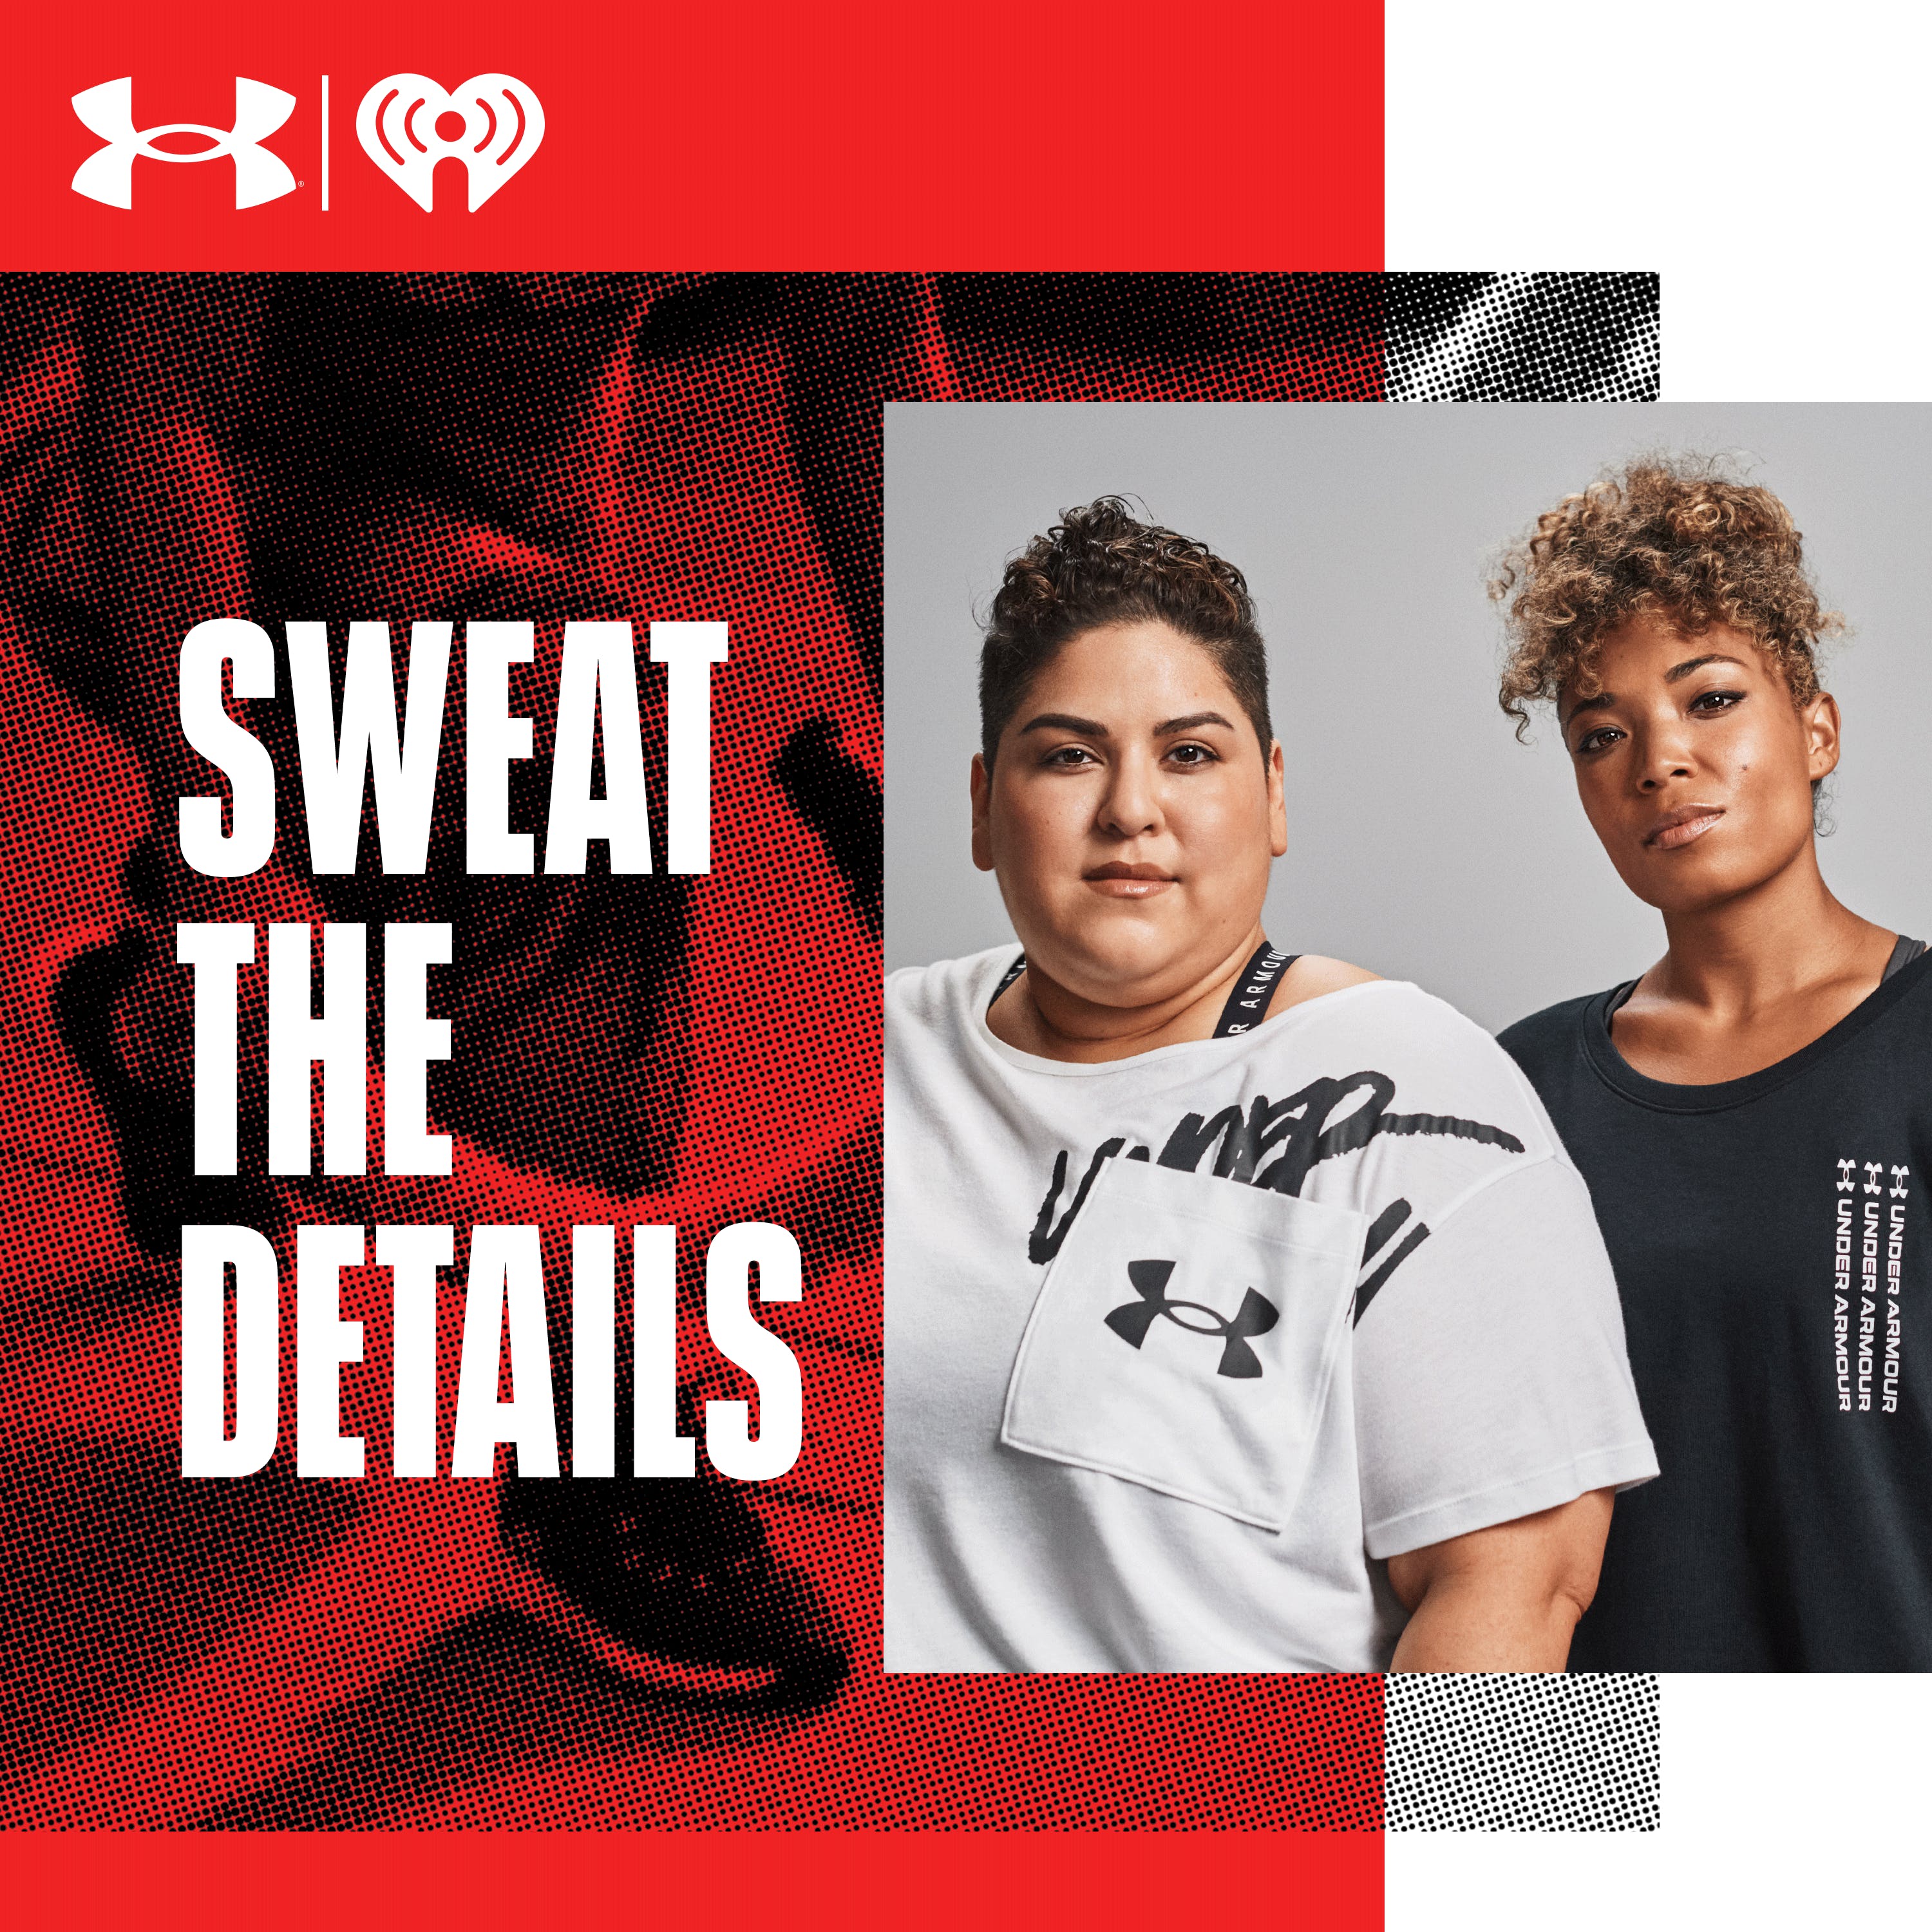 UA Sweat the Details is Back for Season 2